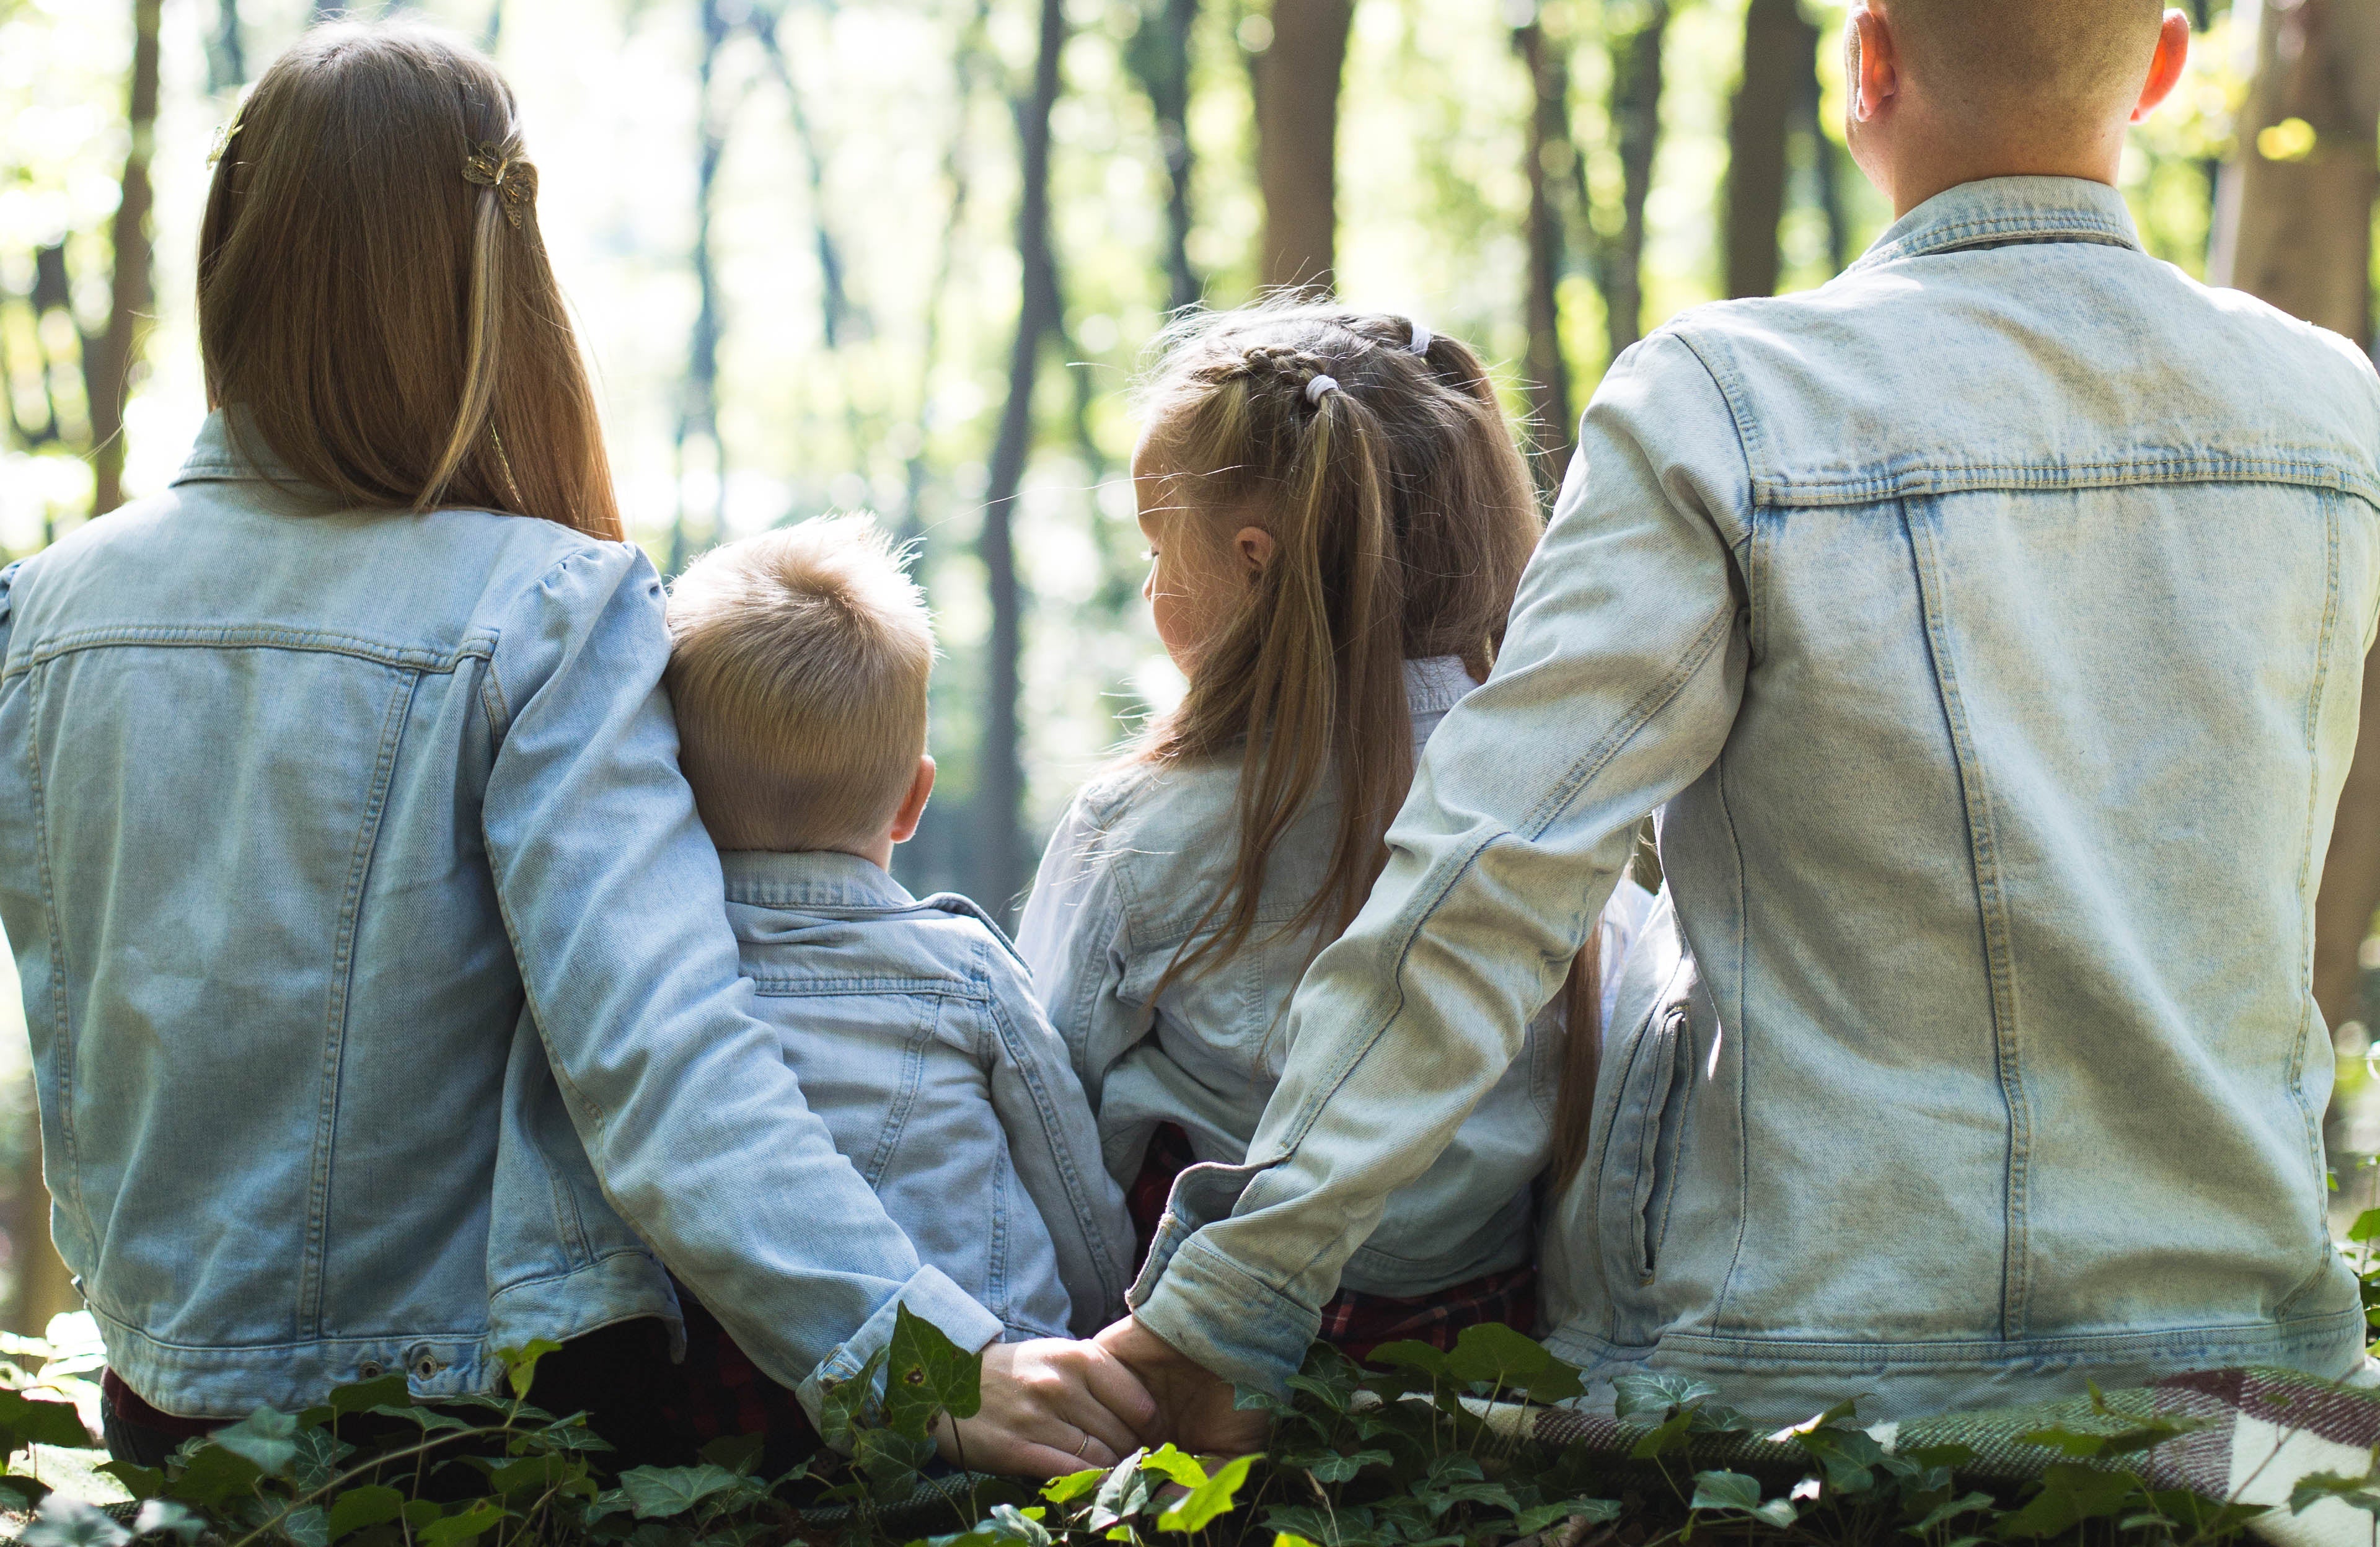 Walking on the Wild Side of Parenting